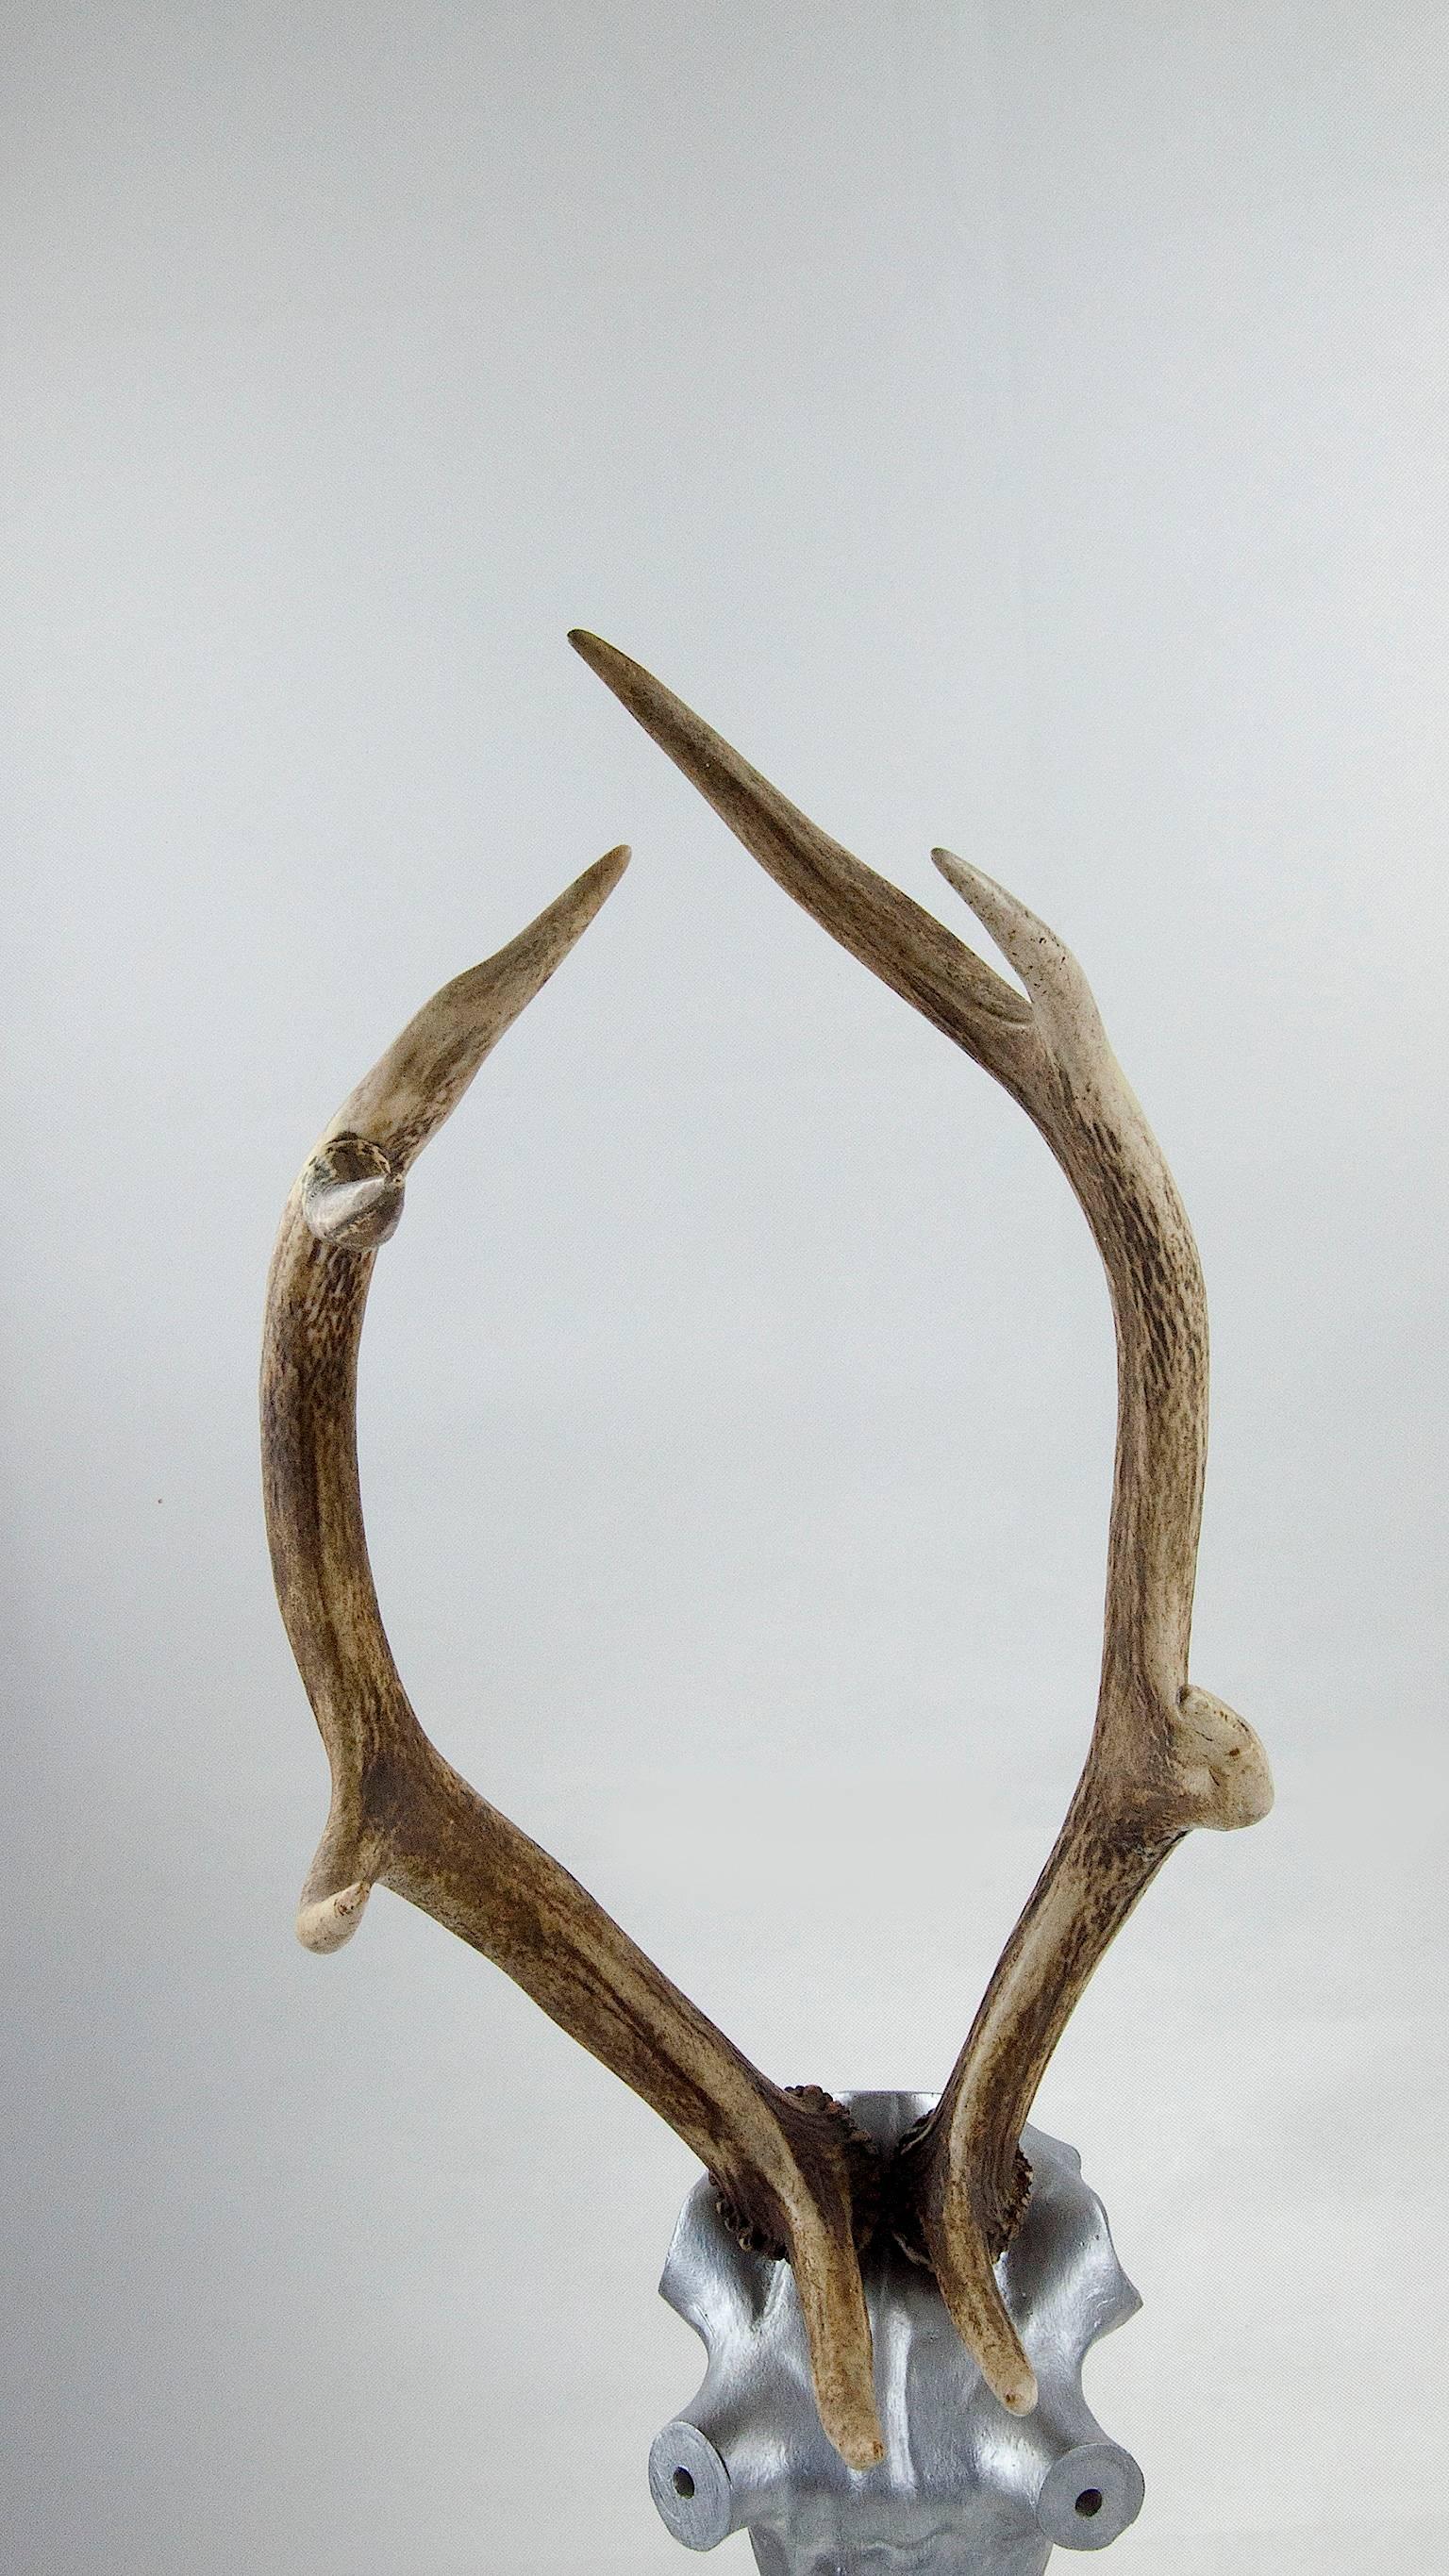 Rare sculpted Mid-Century horns, France
Size can be adjusted very easily.
Measures: Small size 110 cm
Big size 156cm
Sculpture.